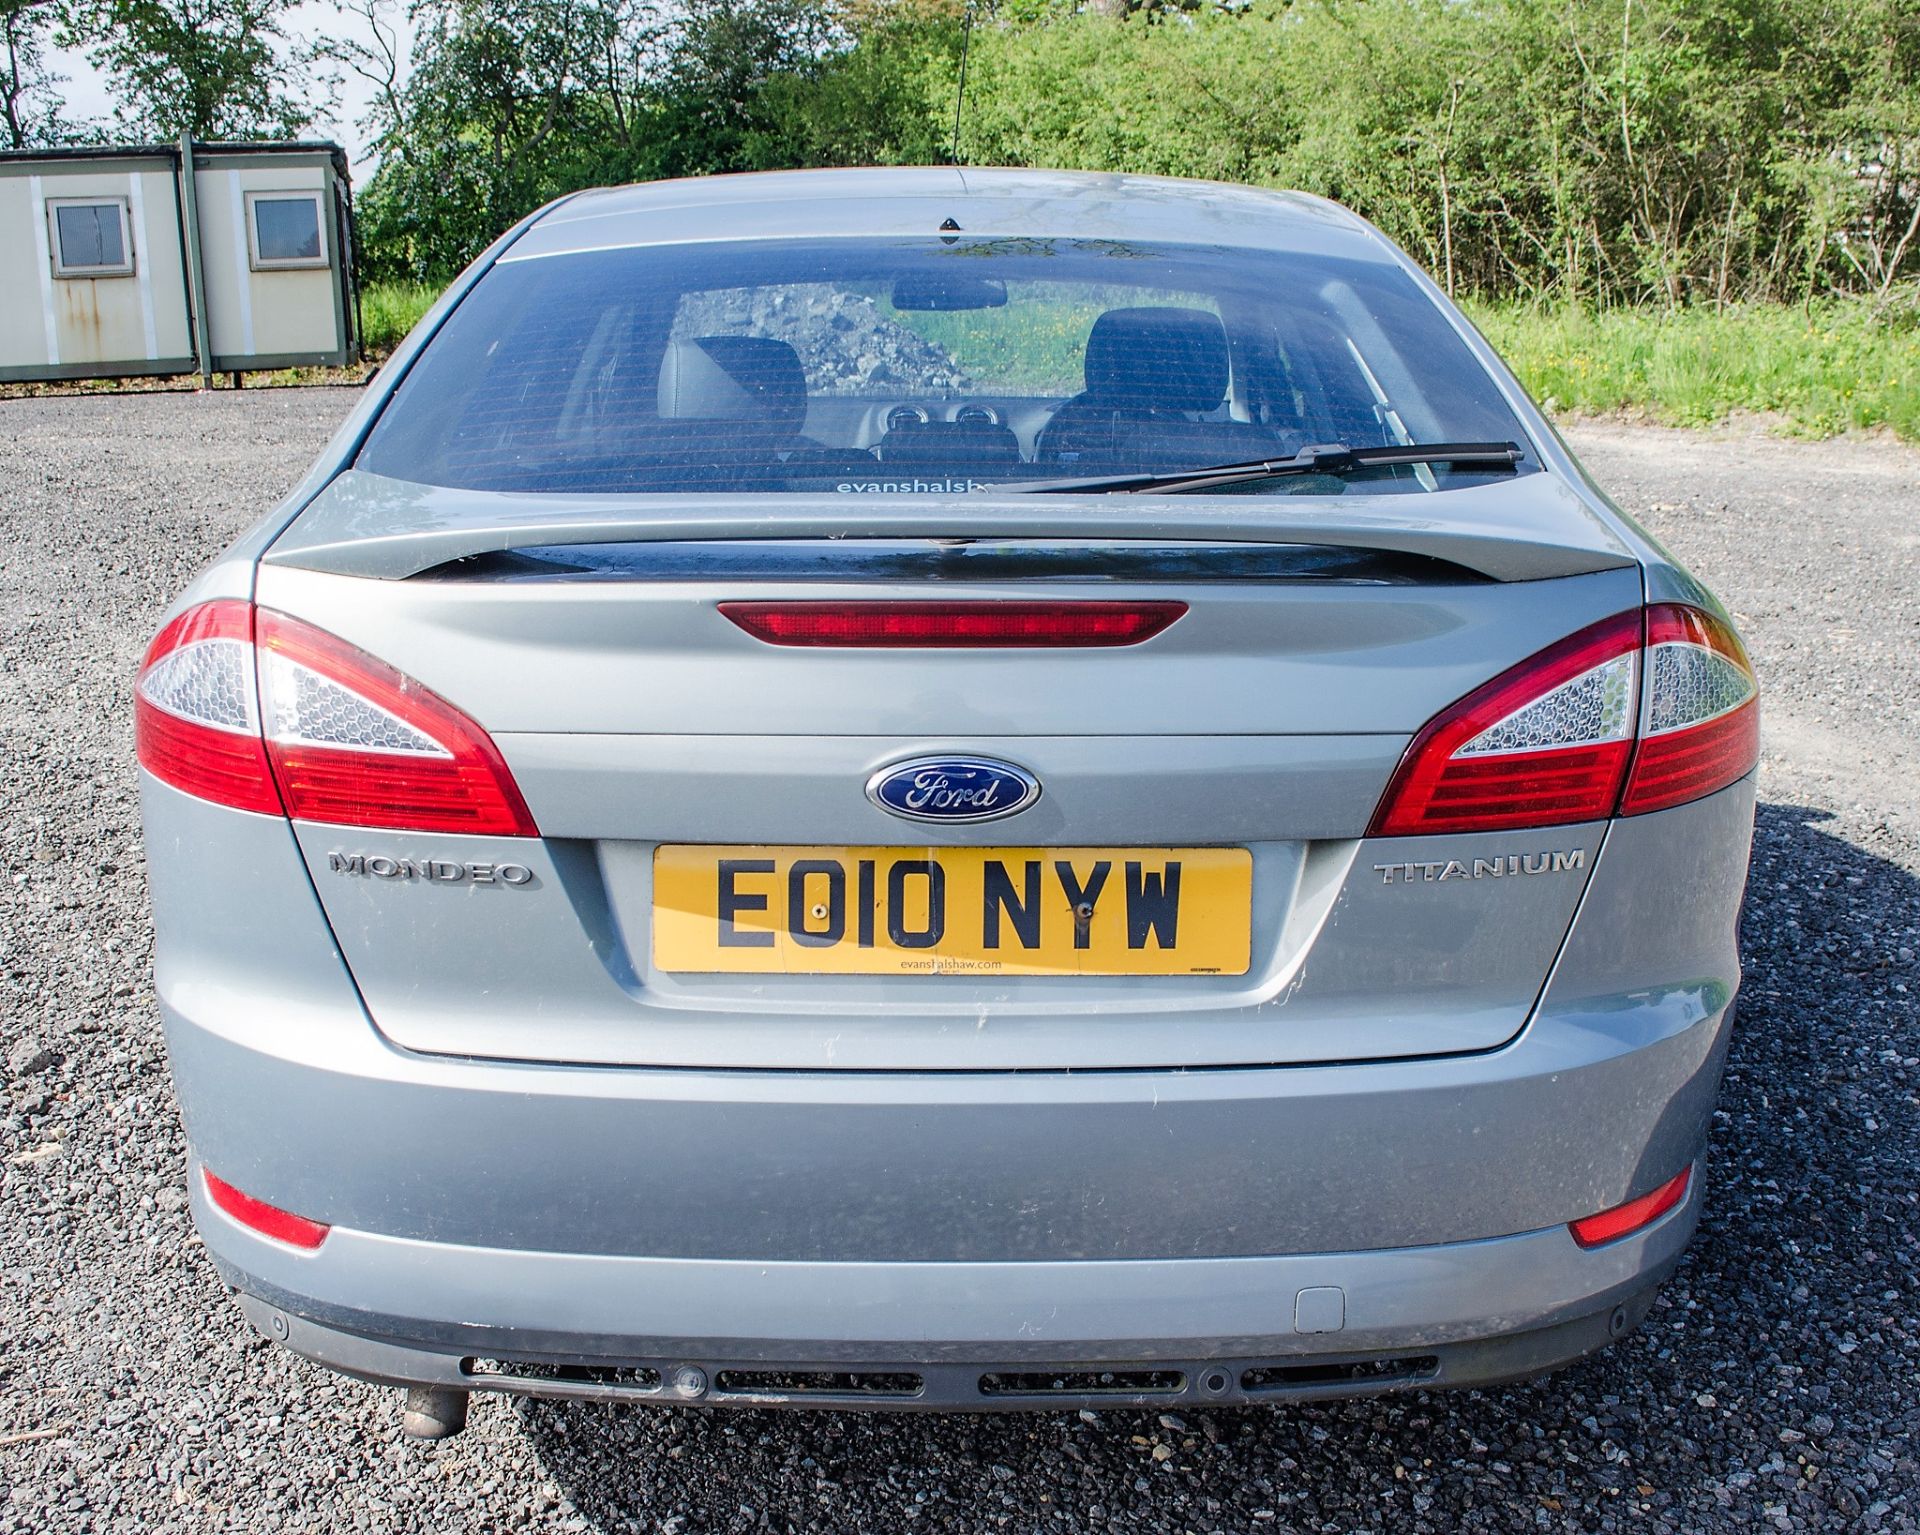 Ford Mondeo 2.0 TDCi Titanium 5 door saloon car Registration Number: EO10 NYW Date of - Image 6 of 29